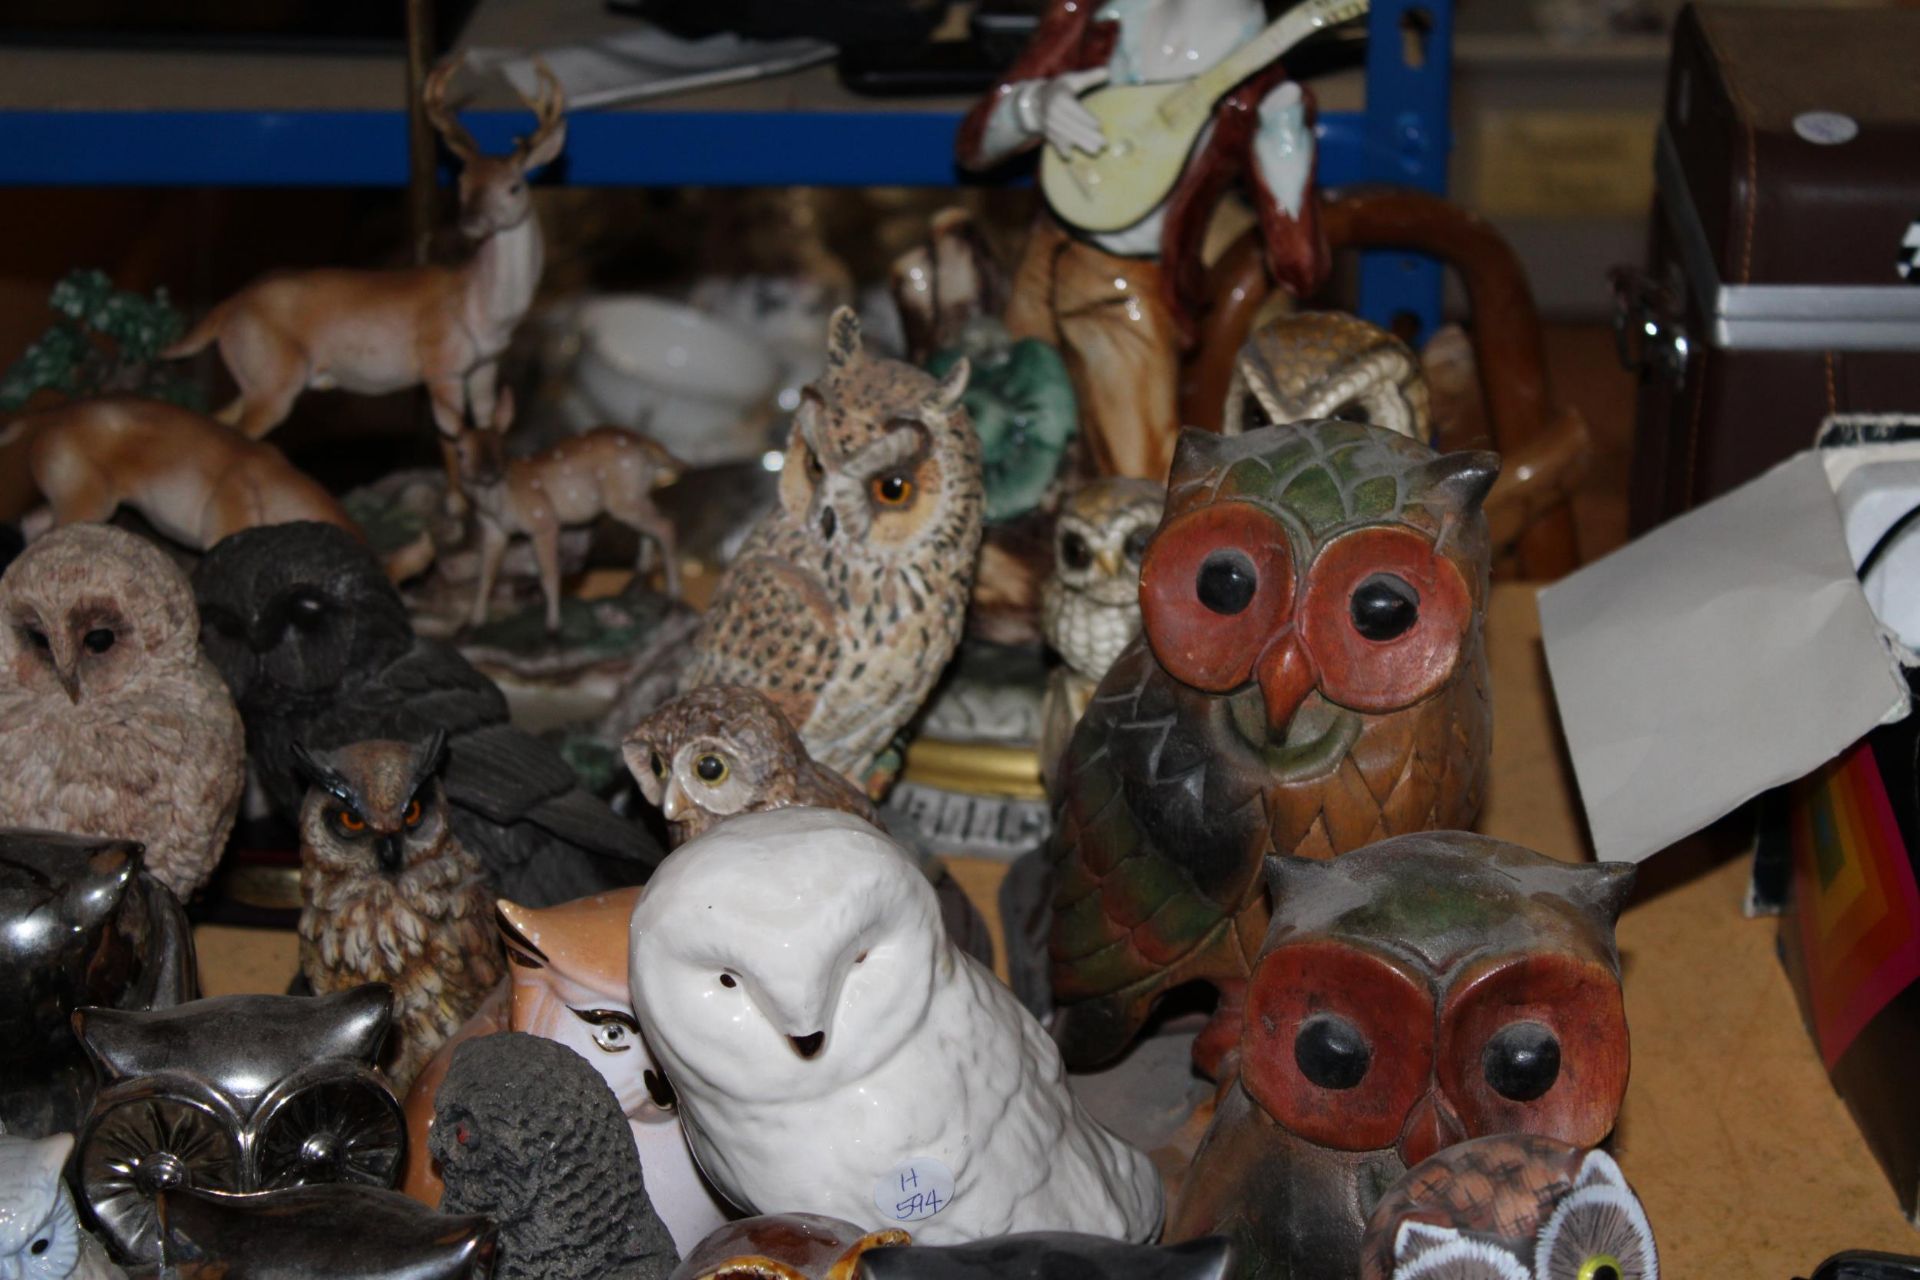 A COLLECTION OF 30+ OWL FIGURES, PLUS A TABLE LAMP WITH A DEER BASE AND A LARGE FIGURE OF A BOY - - Image 5 of 5